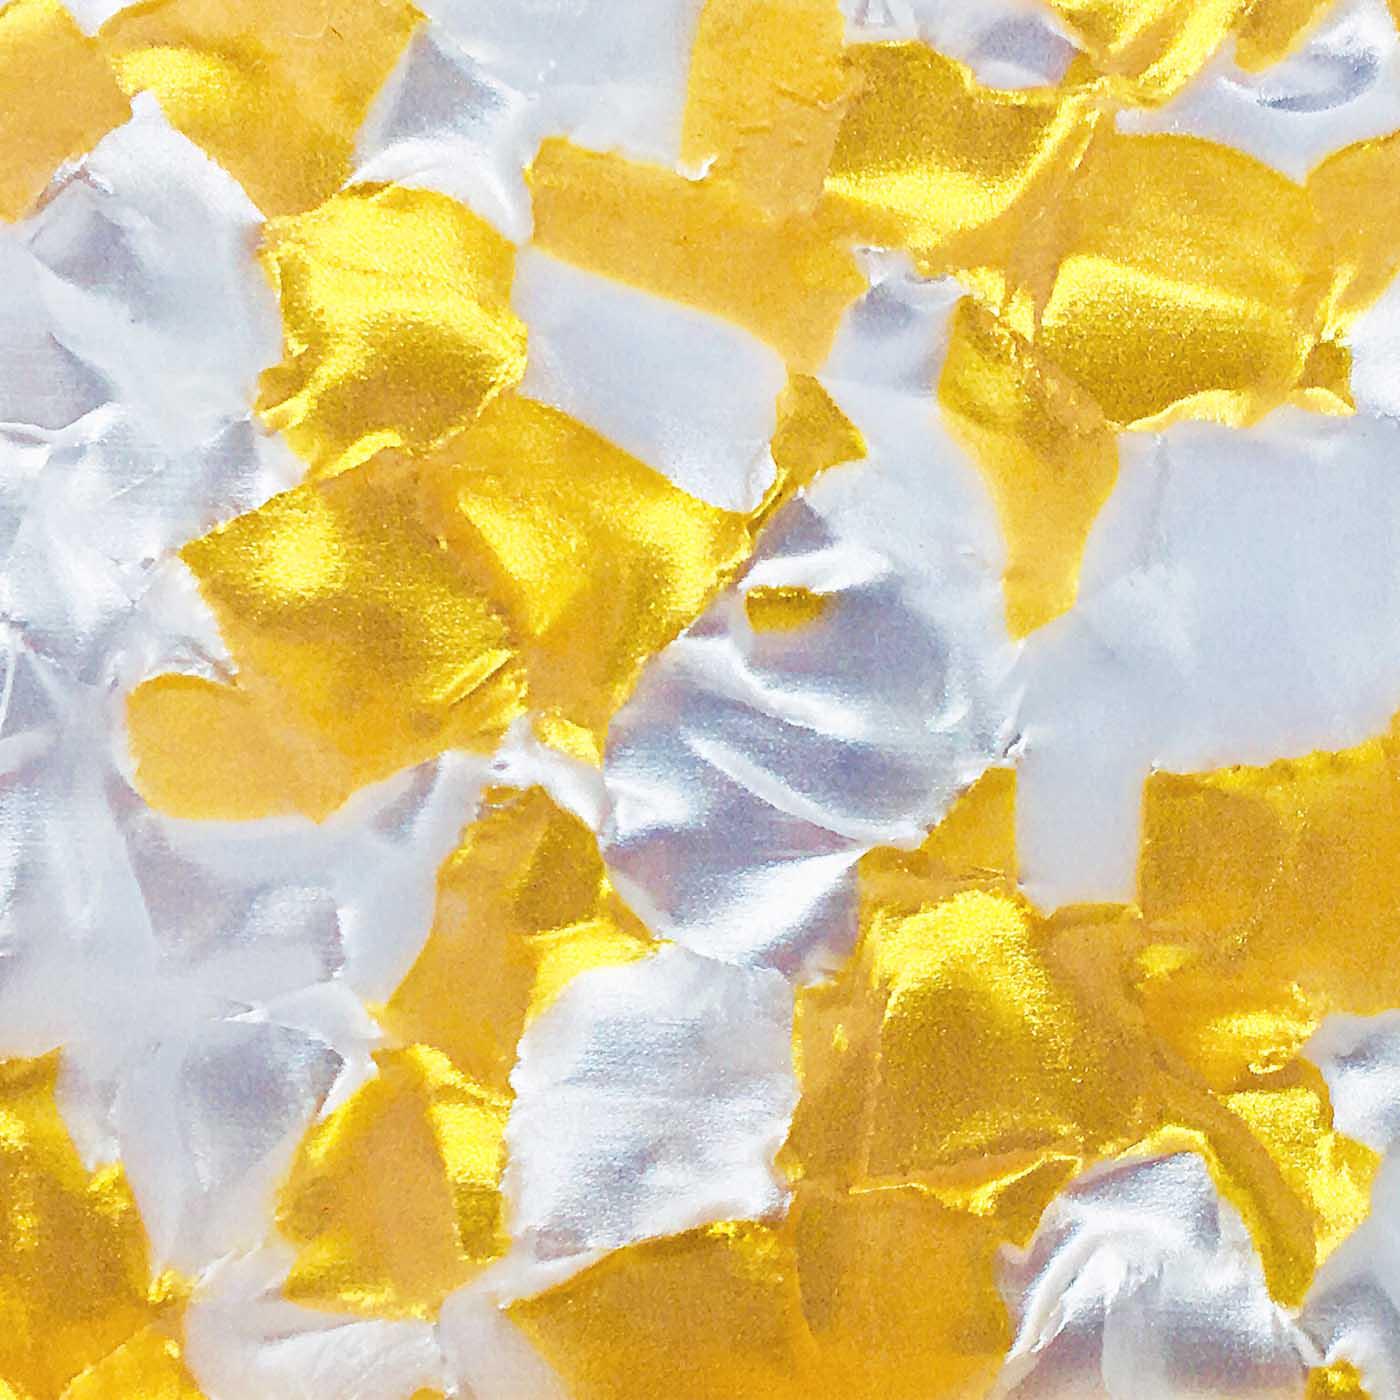 Incudo White and Gold Pearloid Celluloid Laminate Acrylic Sheet - 300x200x3mm (11.8x7.87x0.12")